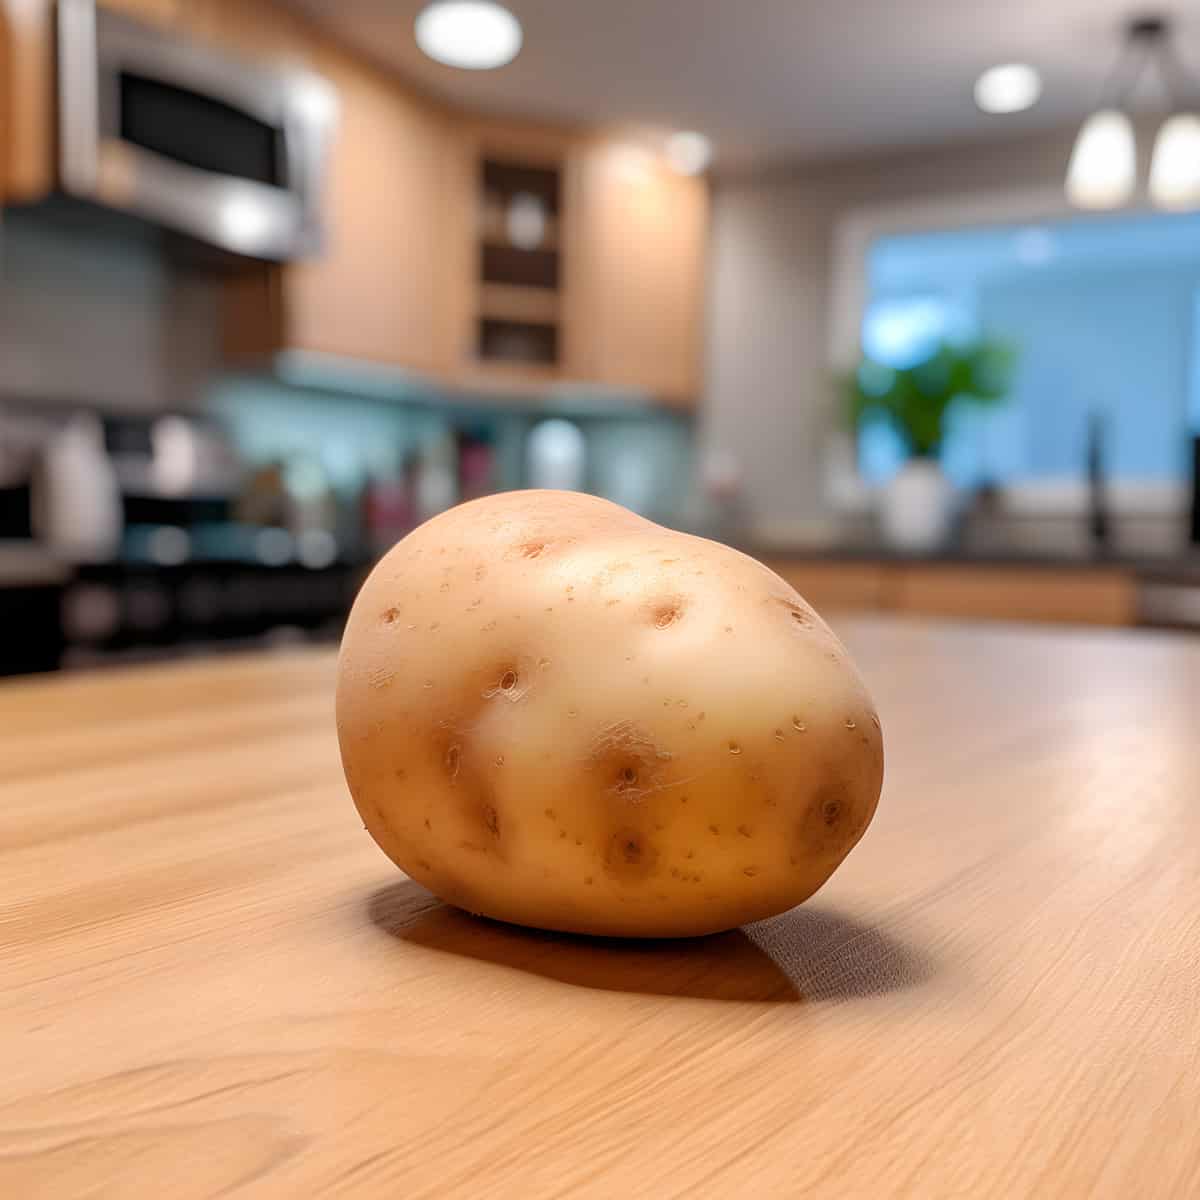 Shepody Potatoes on a kitchen counter